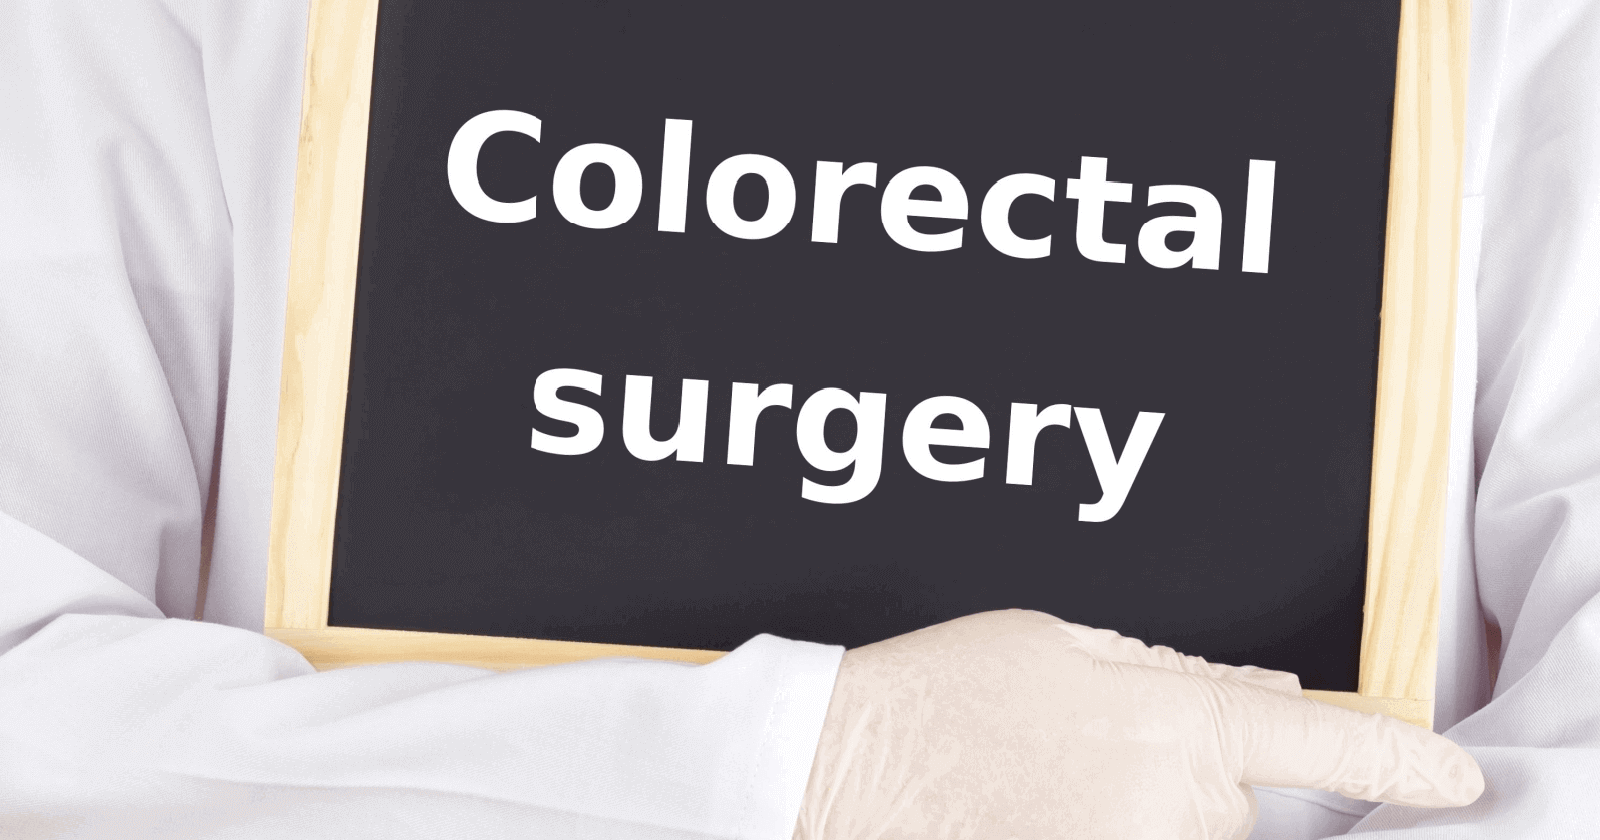 Colorectal Surgery: Meaning, Scope and Other Details